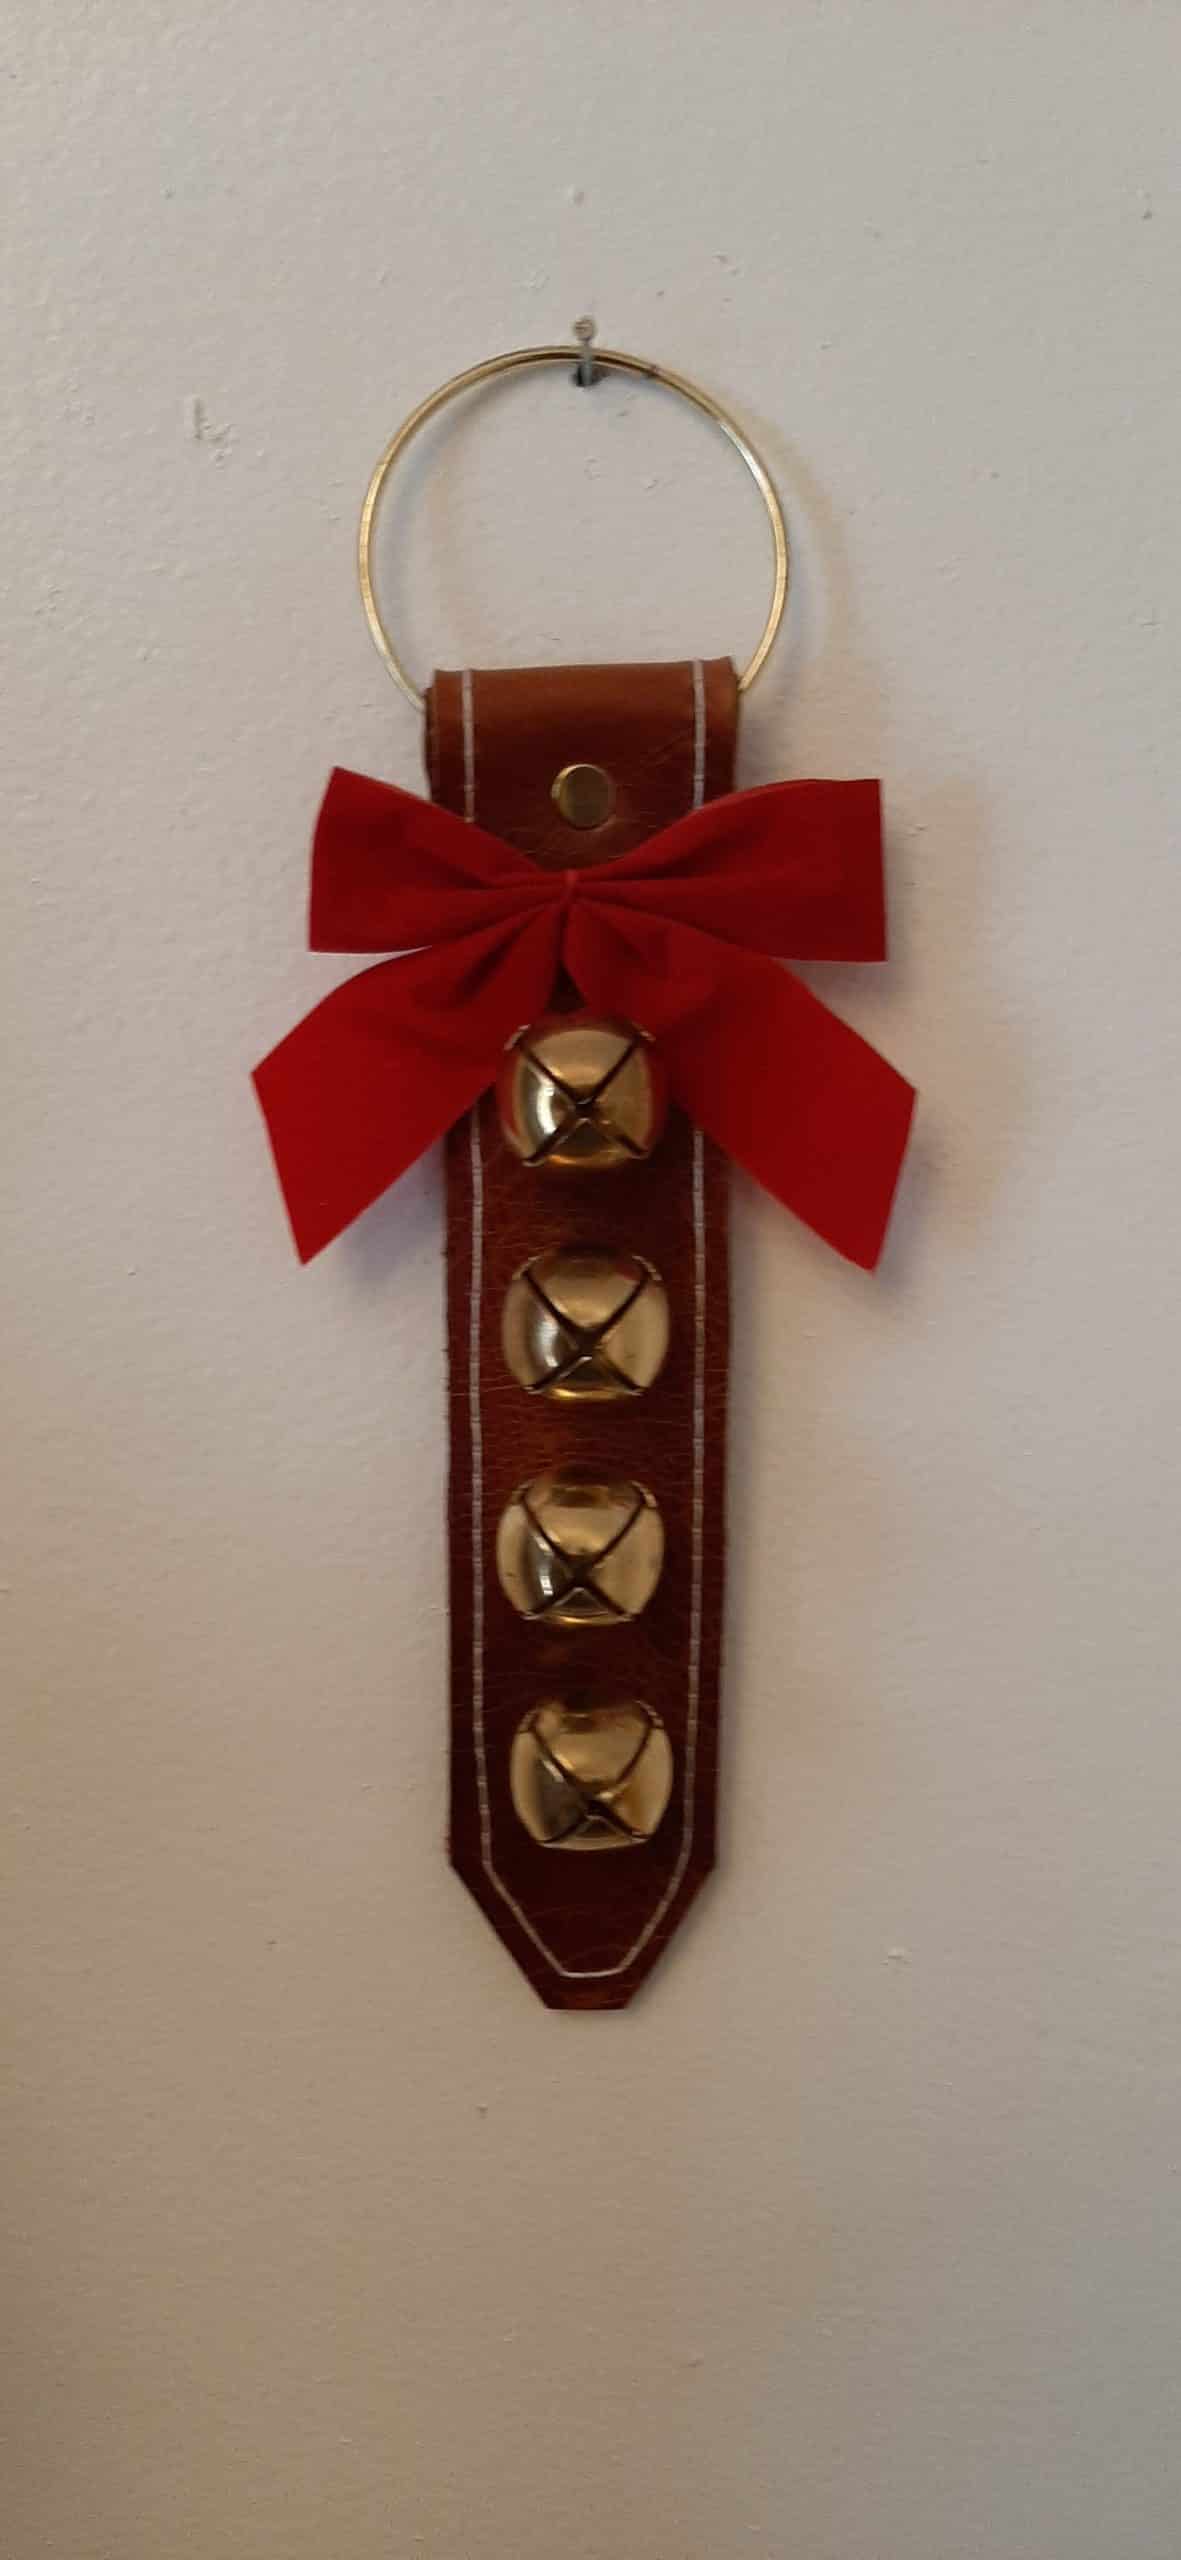 Door hanger with 4 small brass plated bells - brown leather